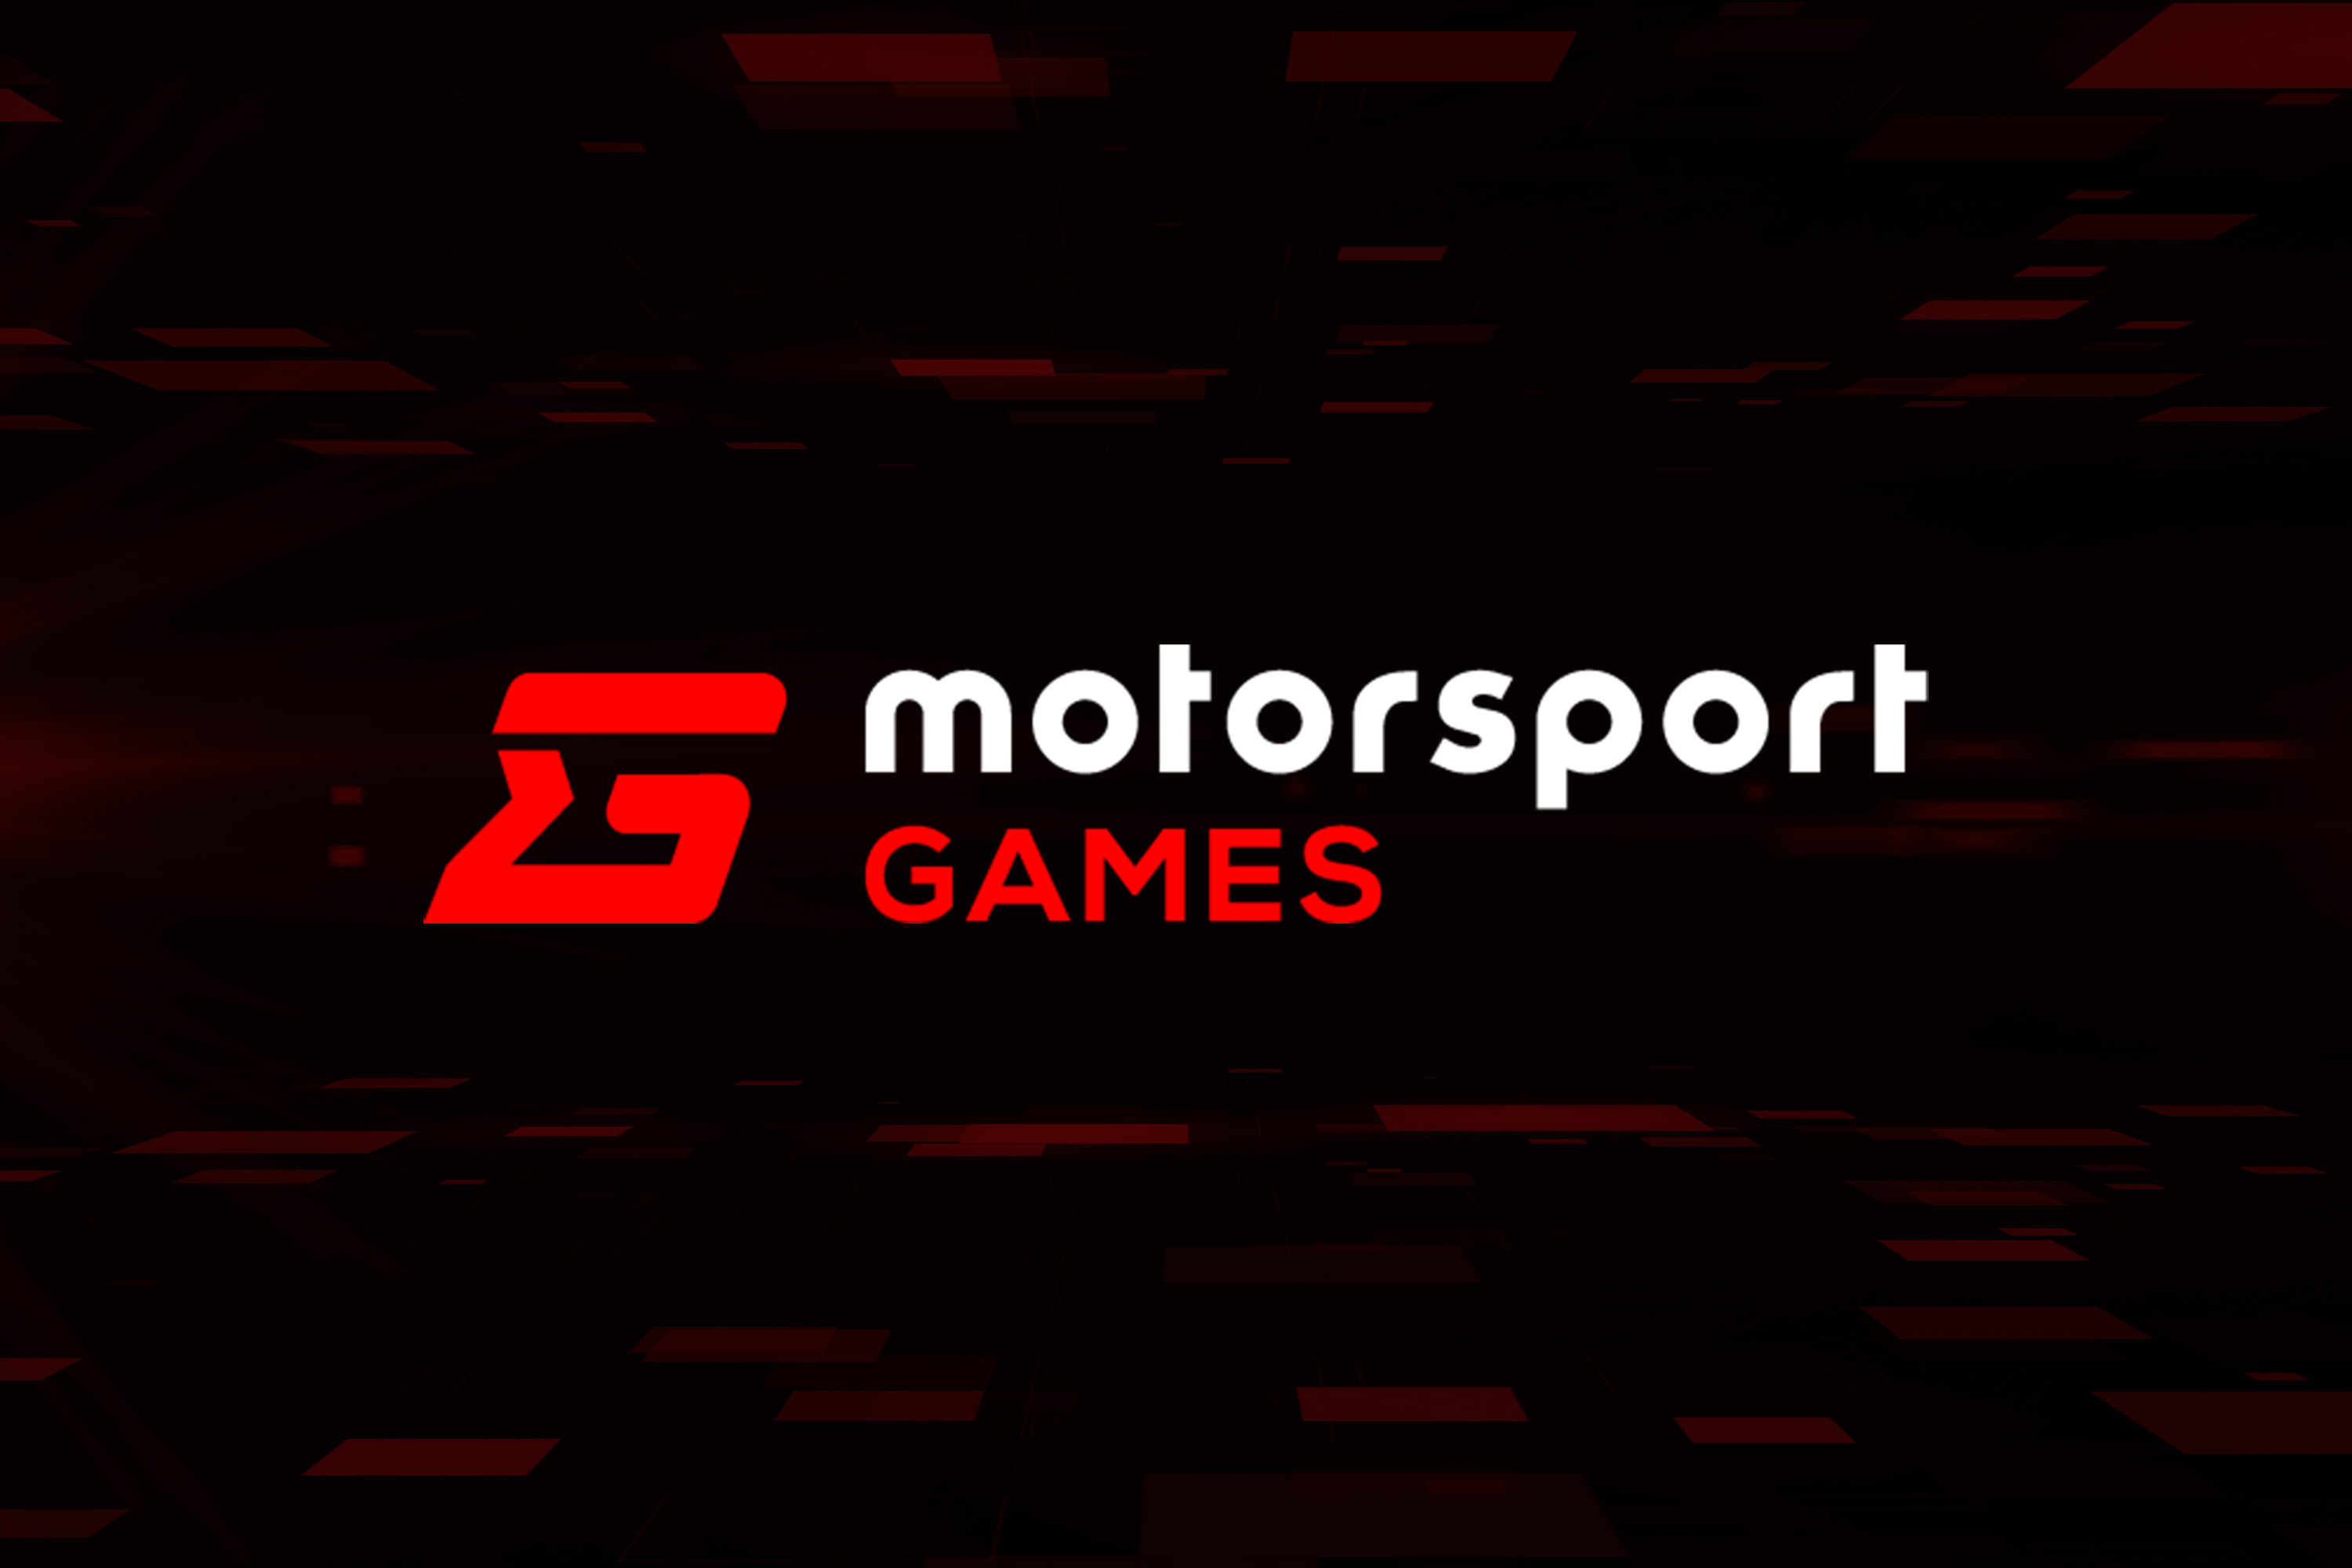 Motorsport Games Enters into Equity Purchase Agreement